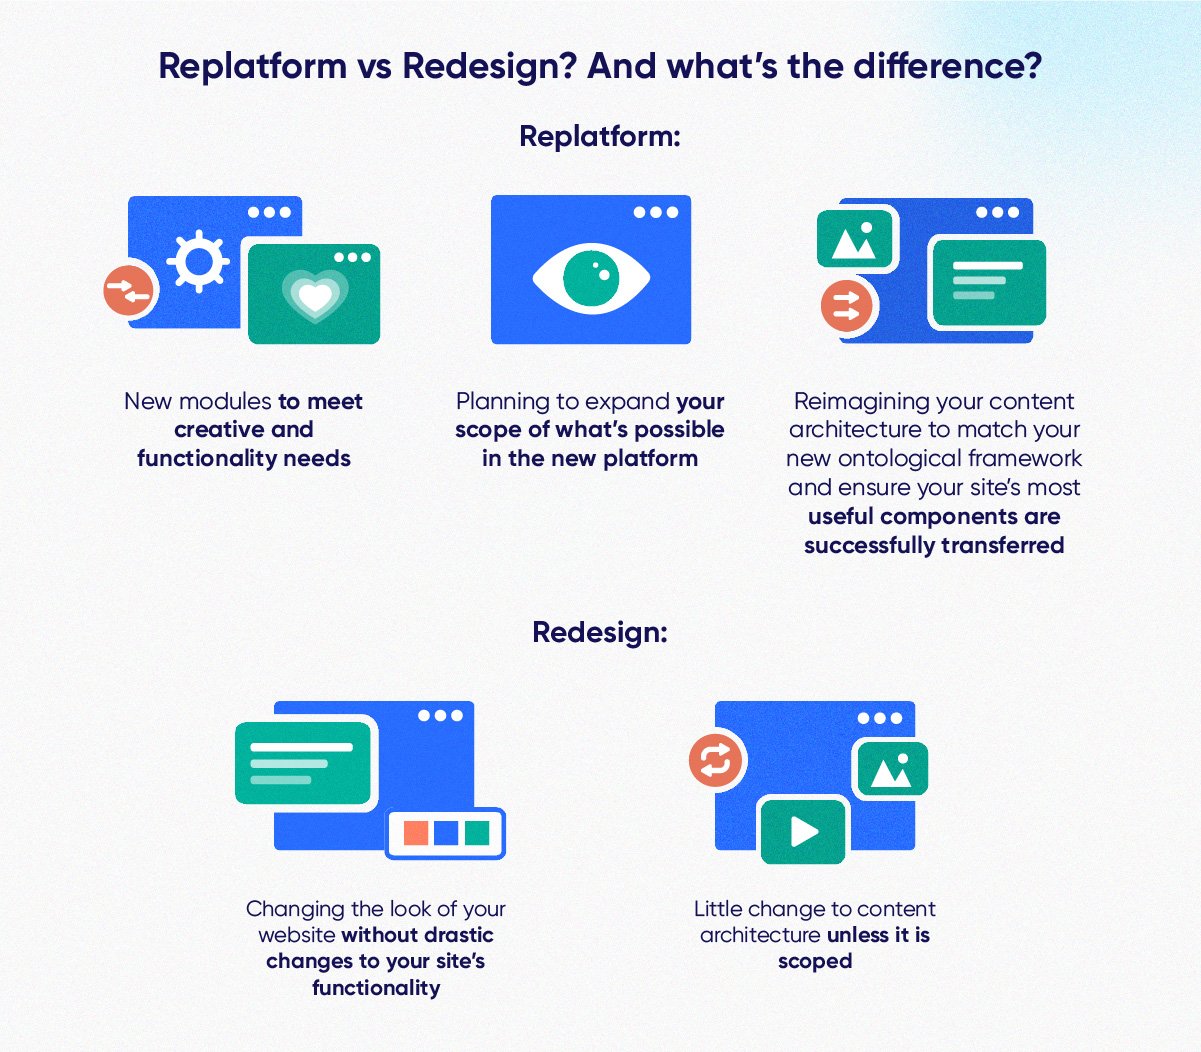 Graphic illustrating differences between replatforming and redesigning a website. Replatform includes adding new modules, expanding the scope, and reimagining your content architecture. Redesigning includes changing the look of the site and little change to the content architecture.